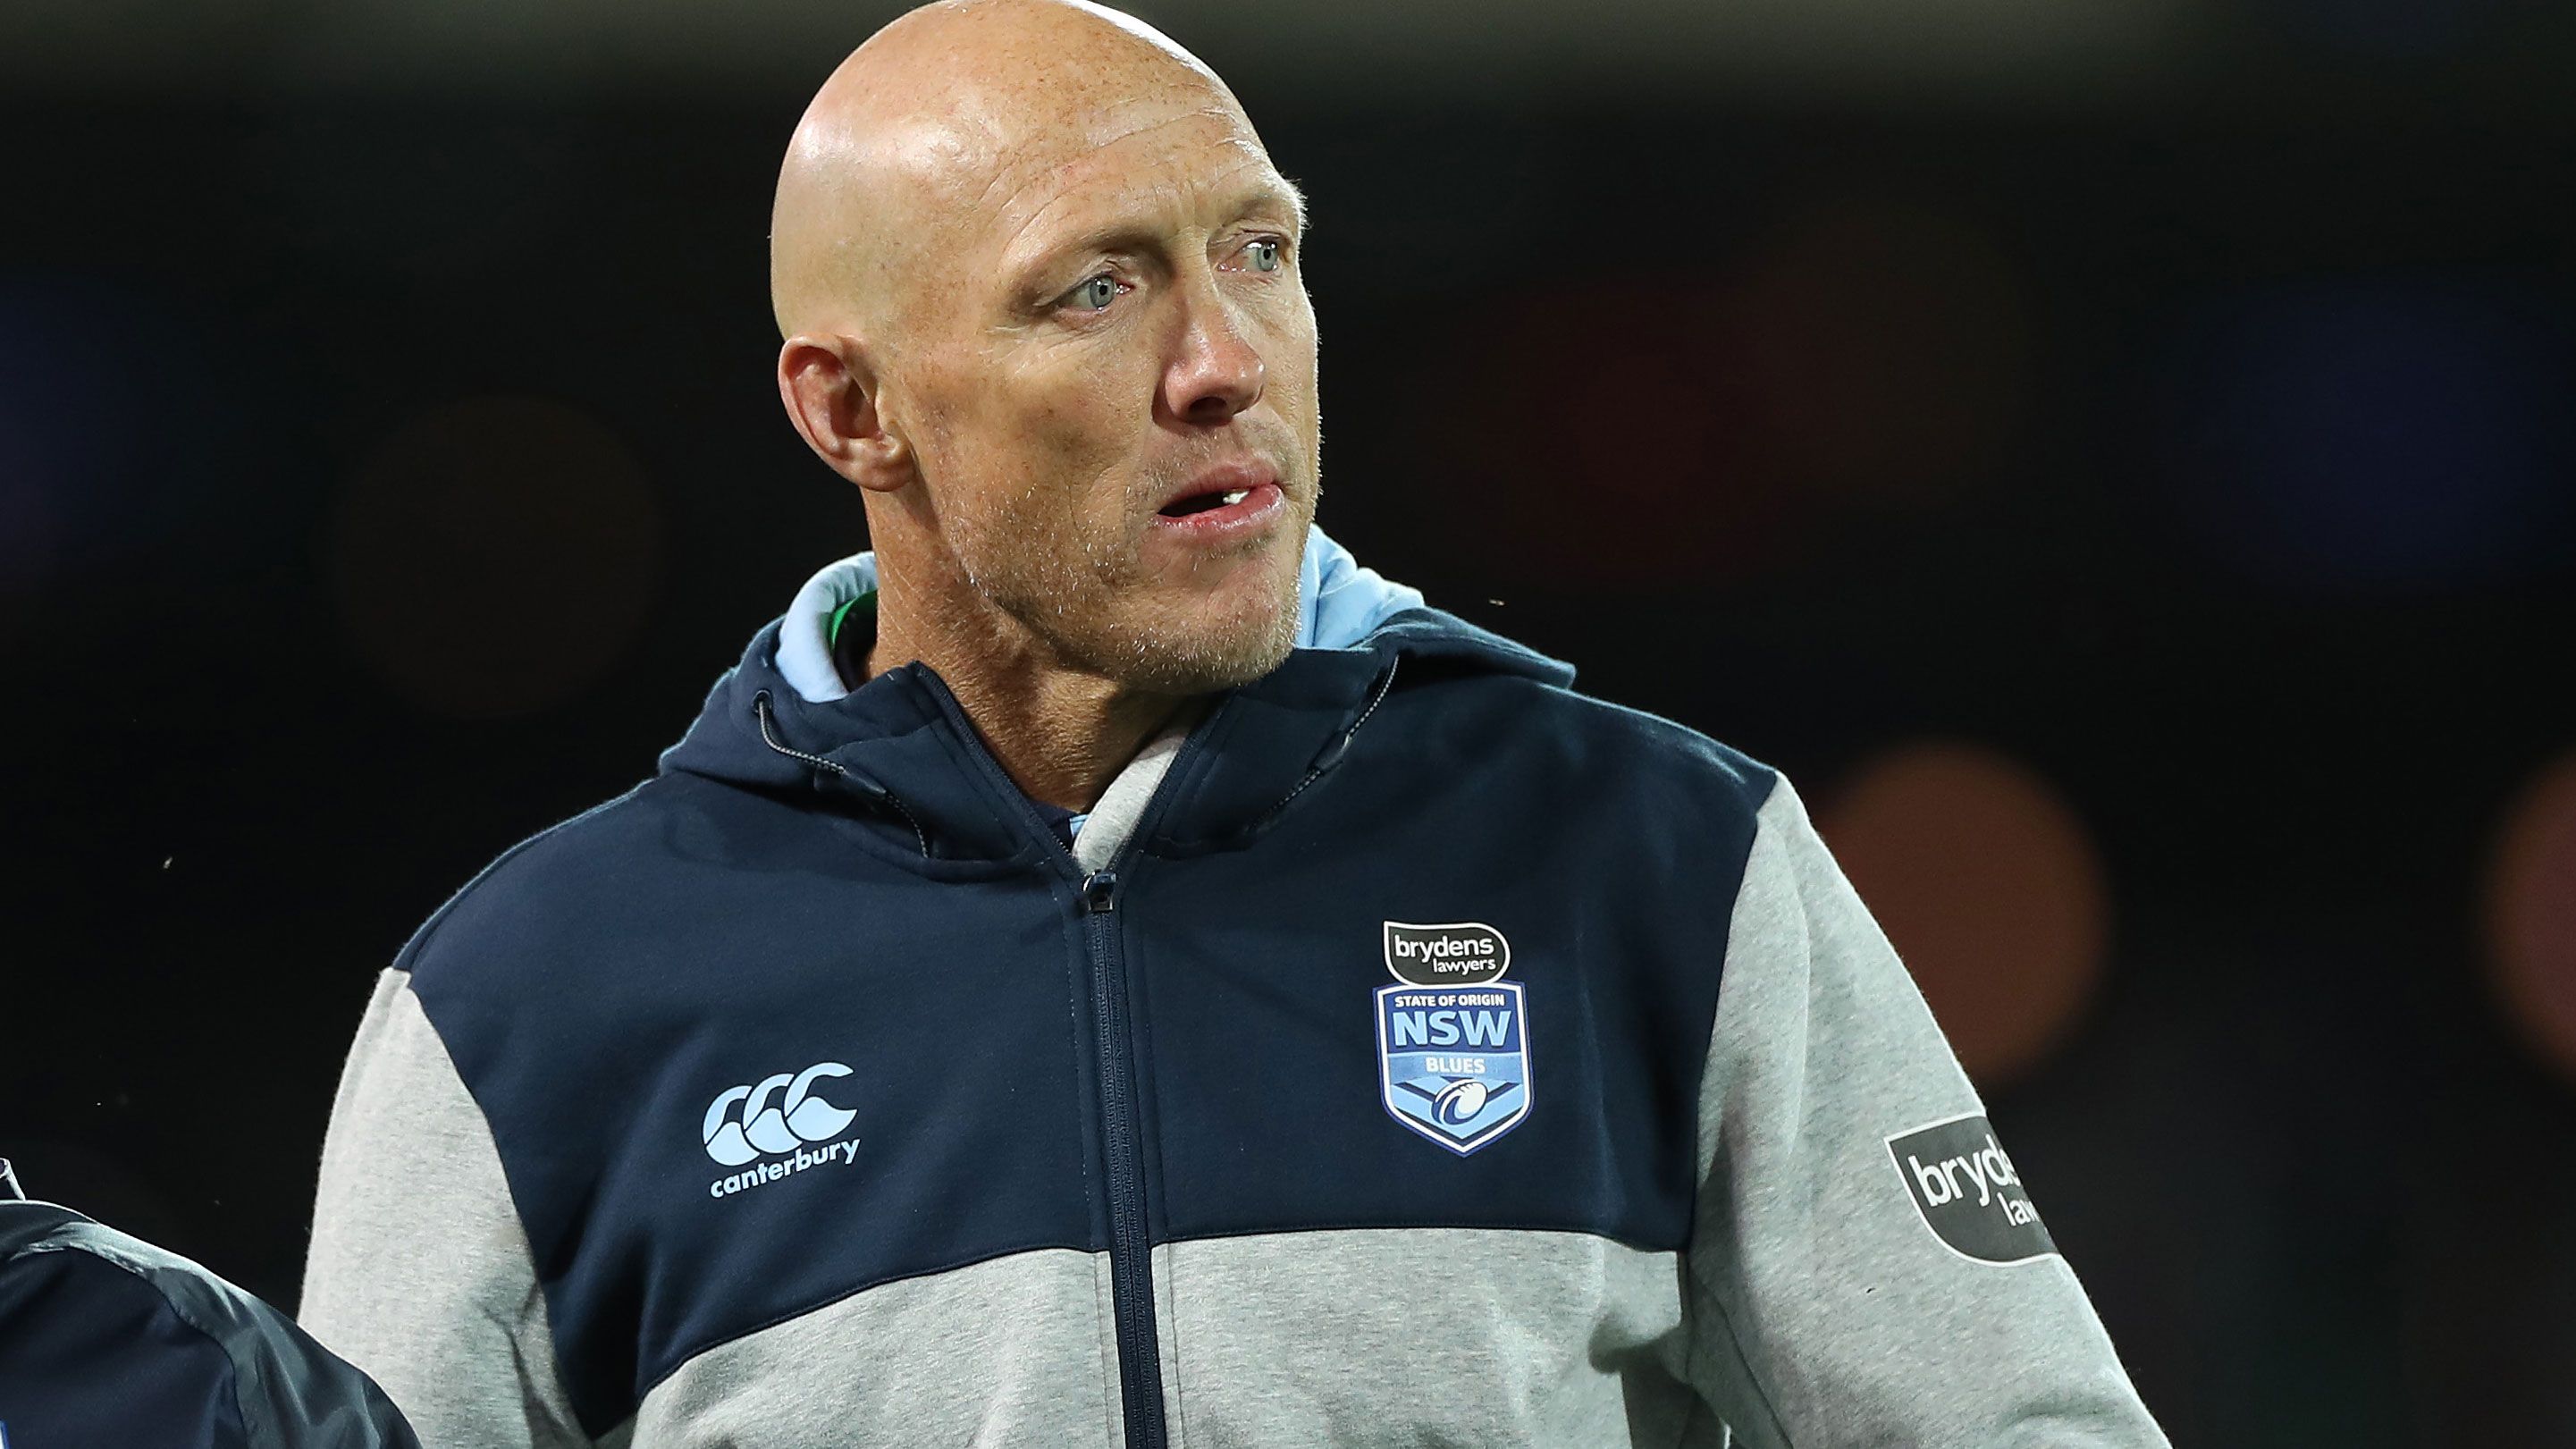 Incoming Sharks coach Craig Fitzgibbon fronts media over Morris sacking, missed Reynolds signing